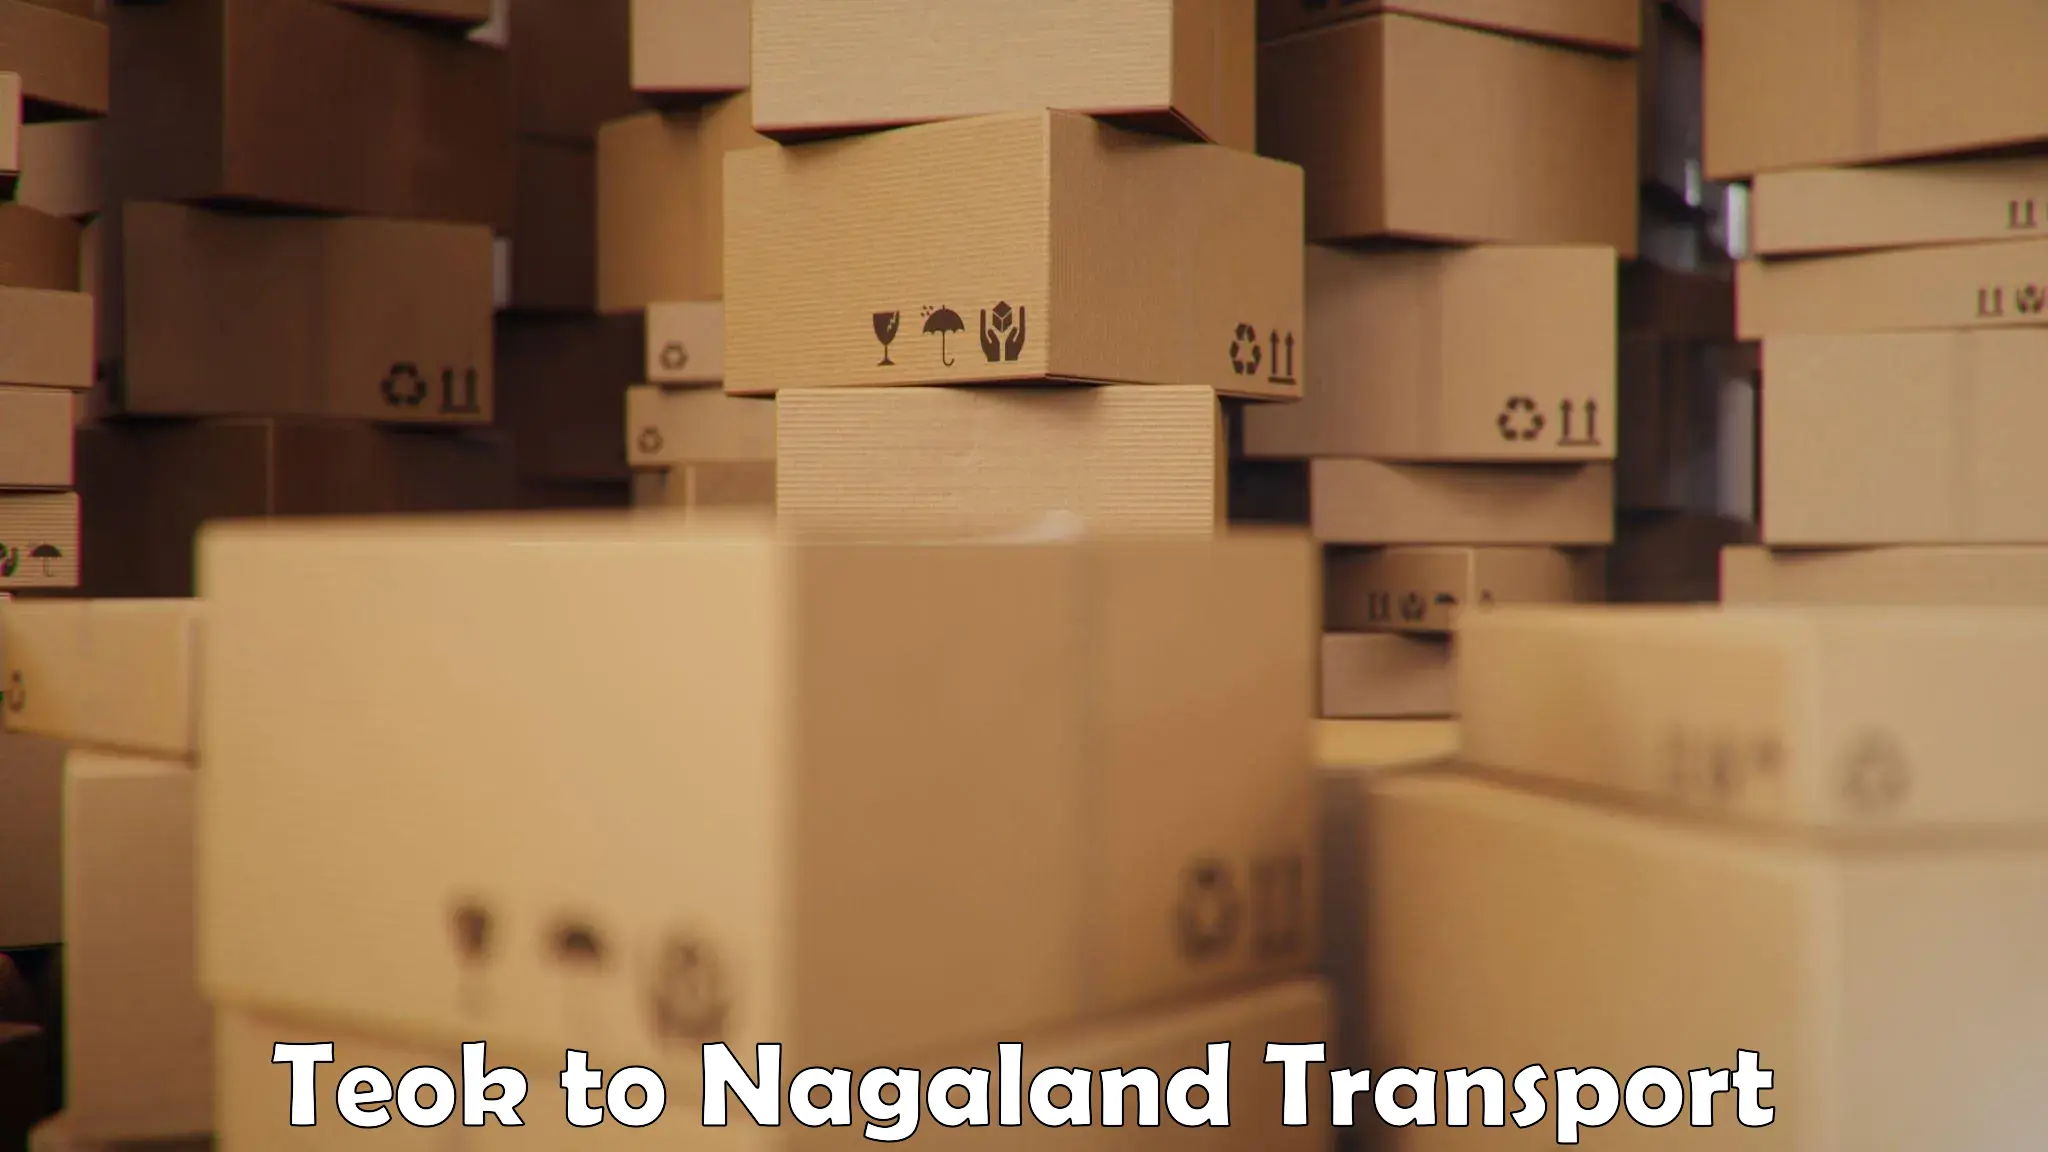 Delivery service Teok to Nagaland